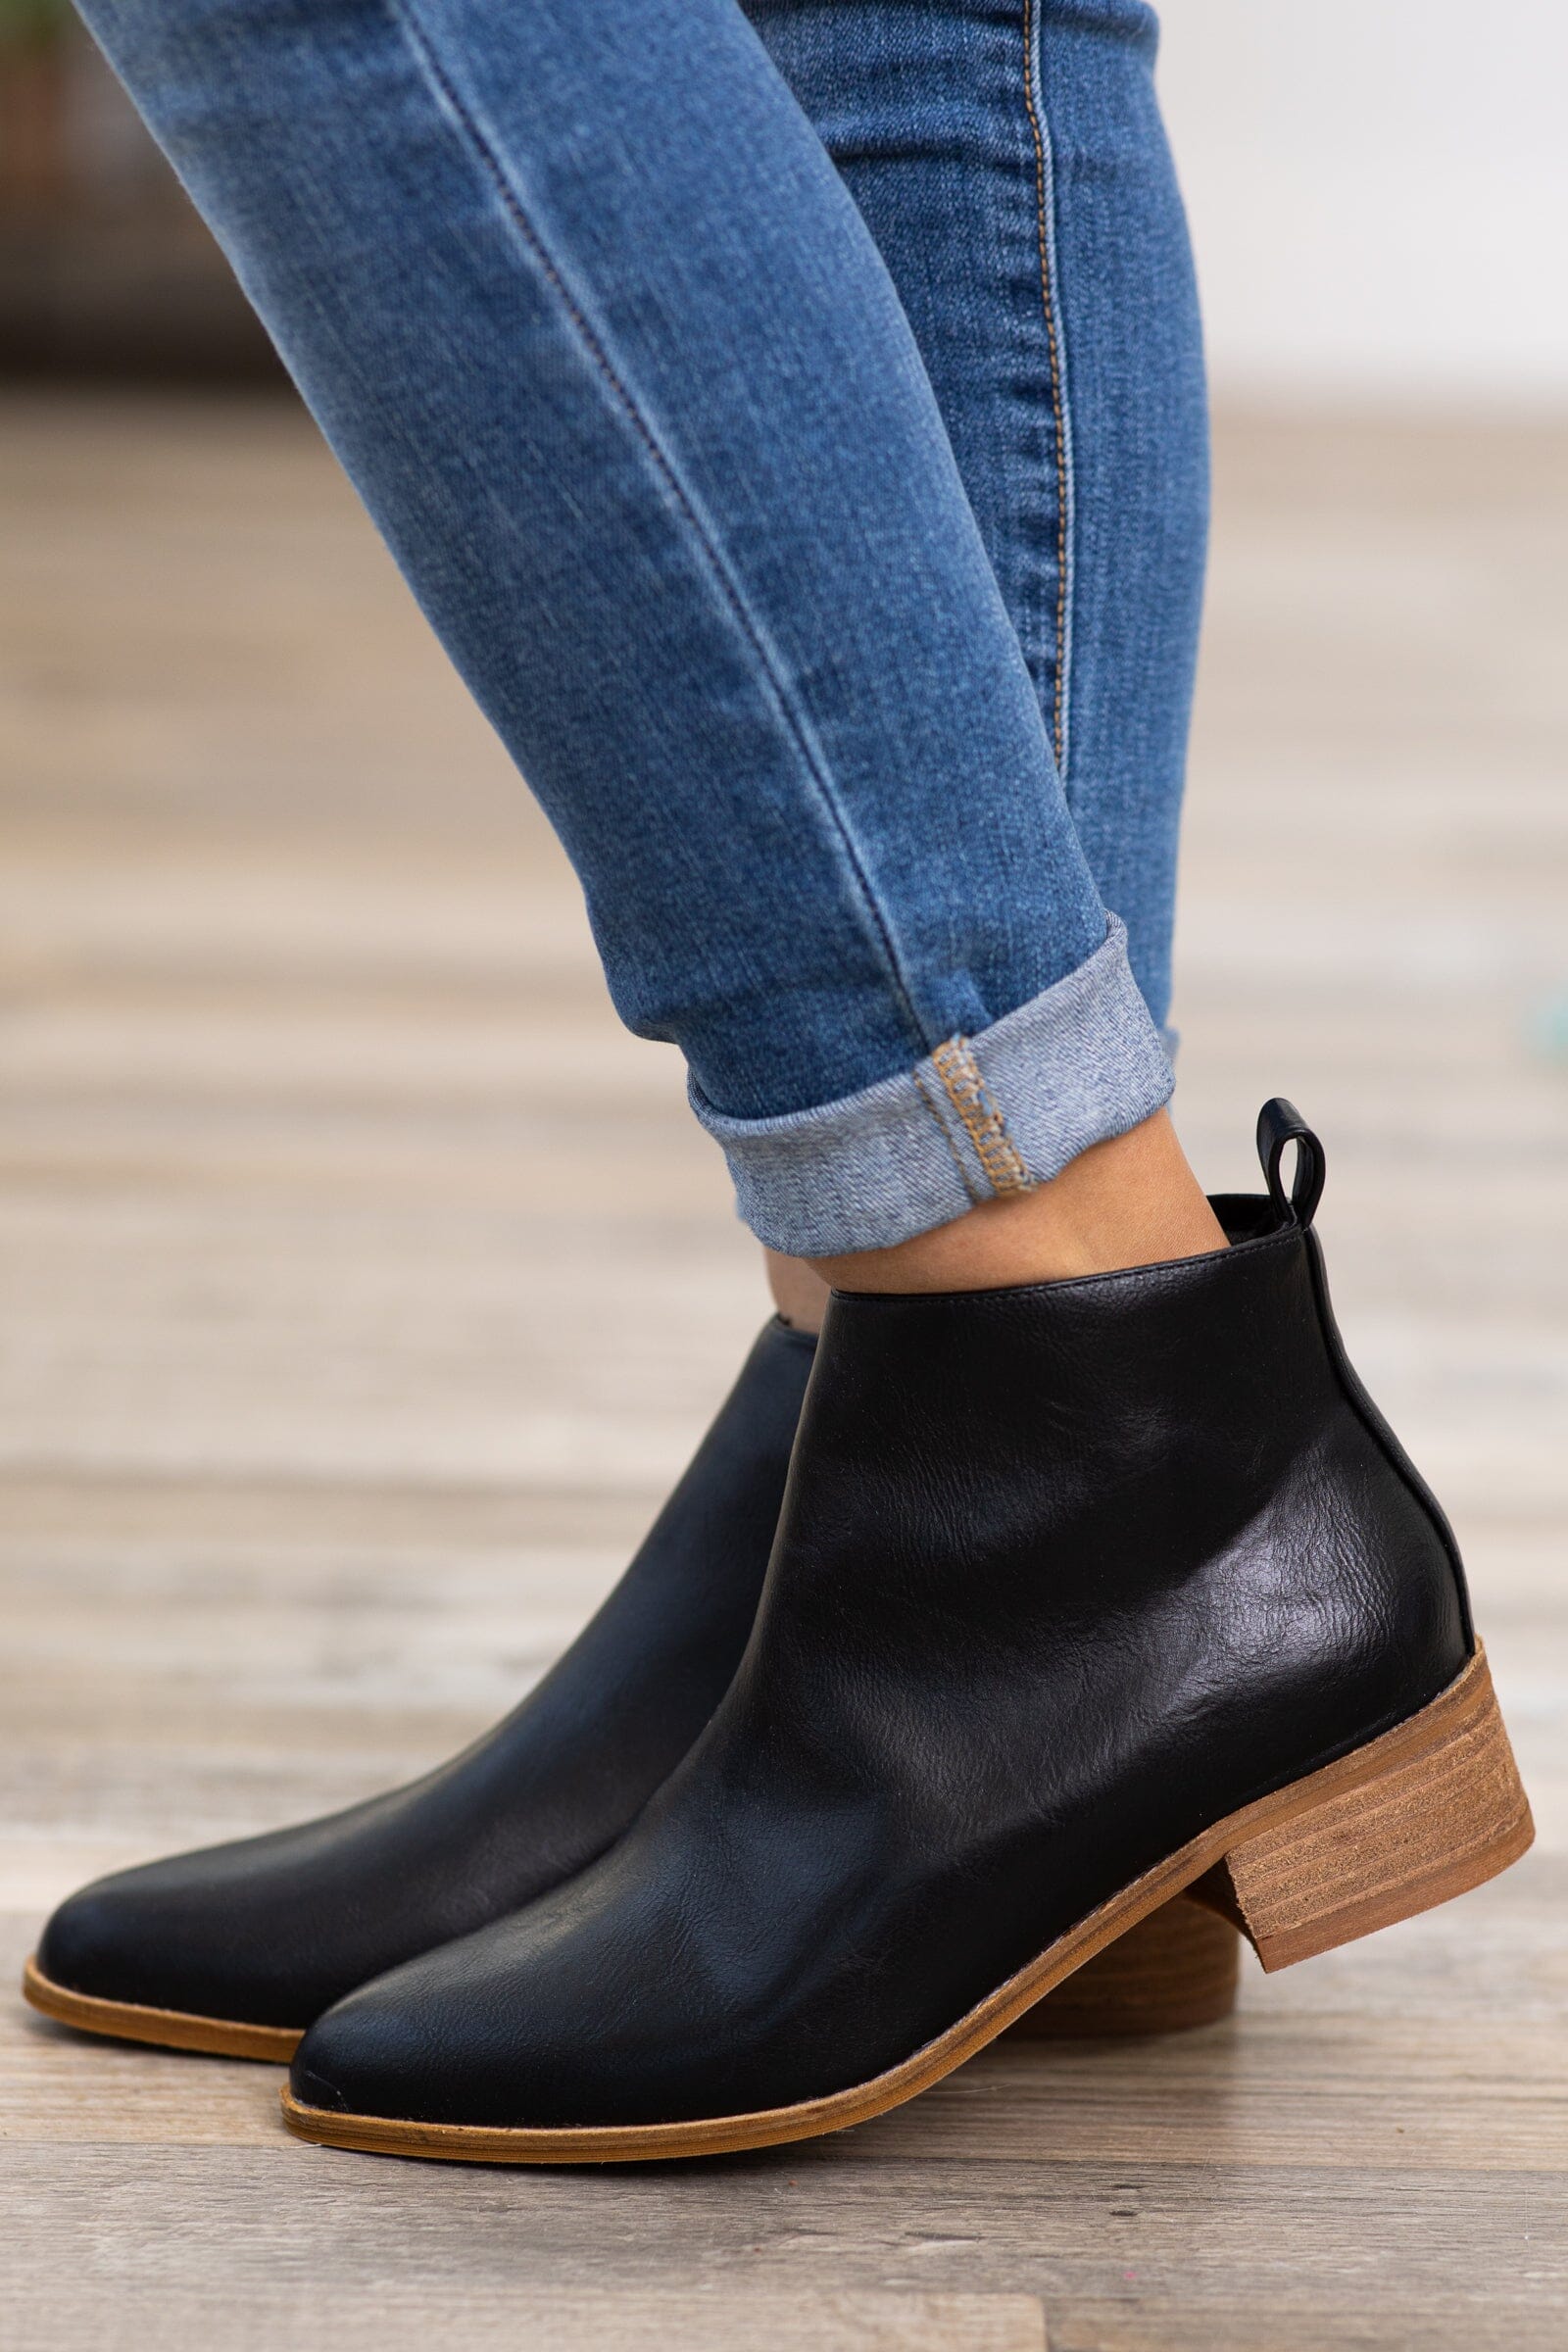 Black Ankle Bootie With Pull Tab - Filly Flair